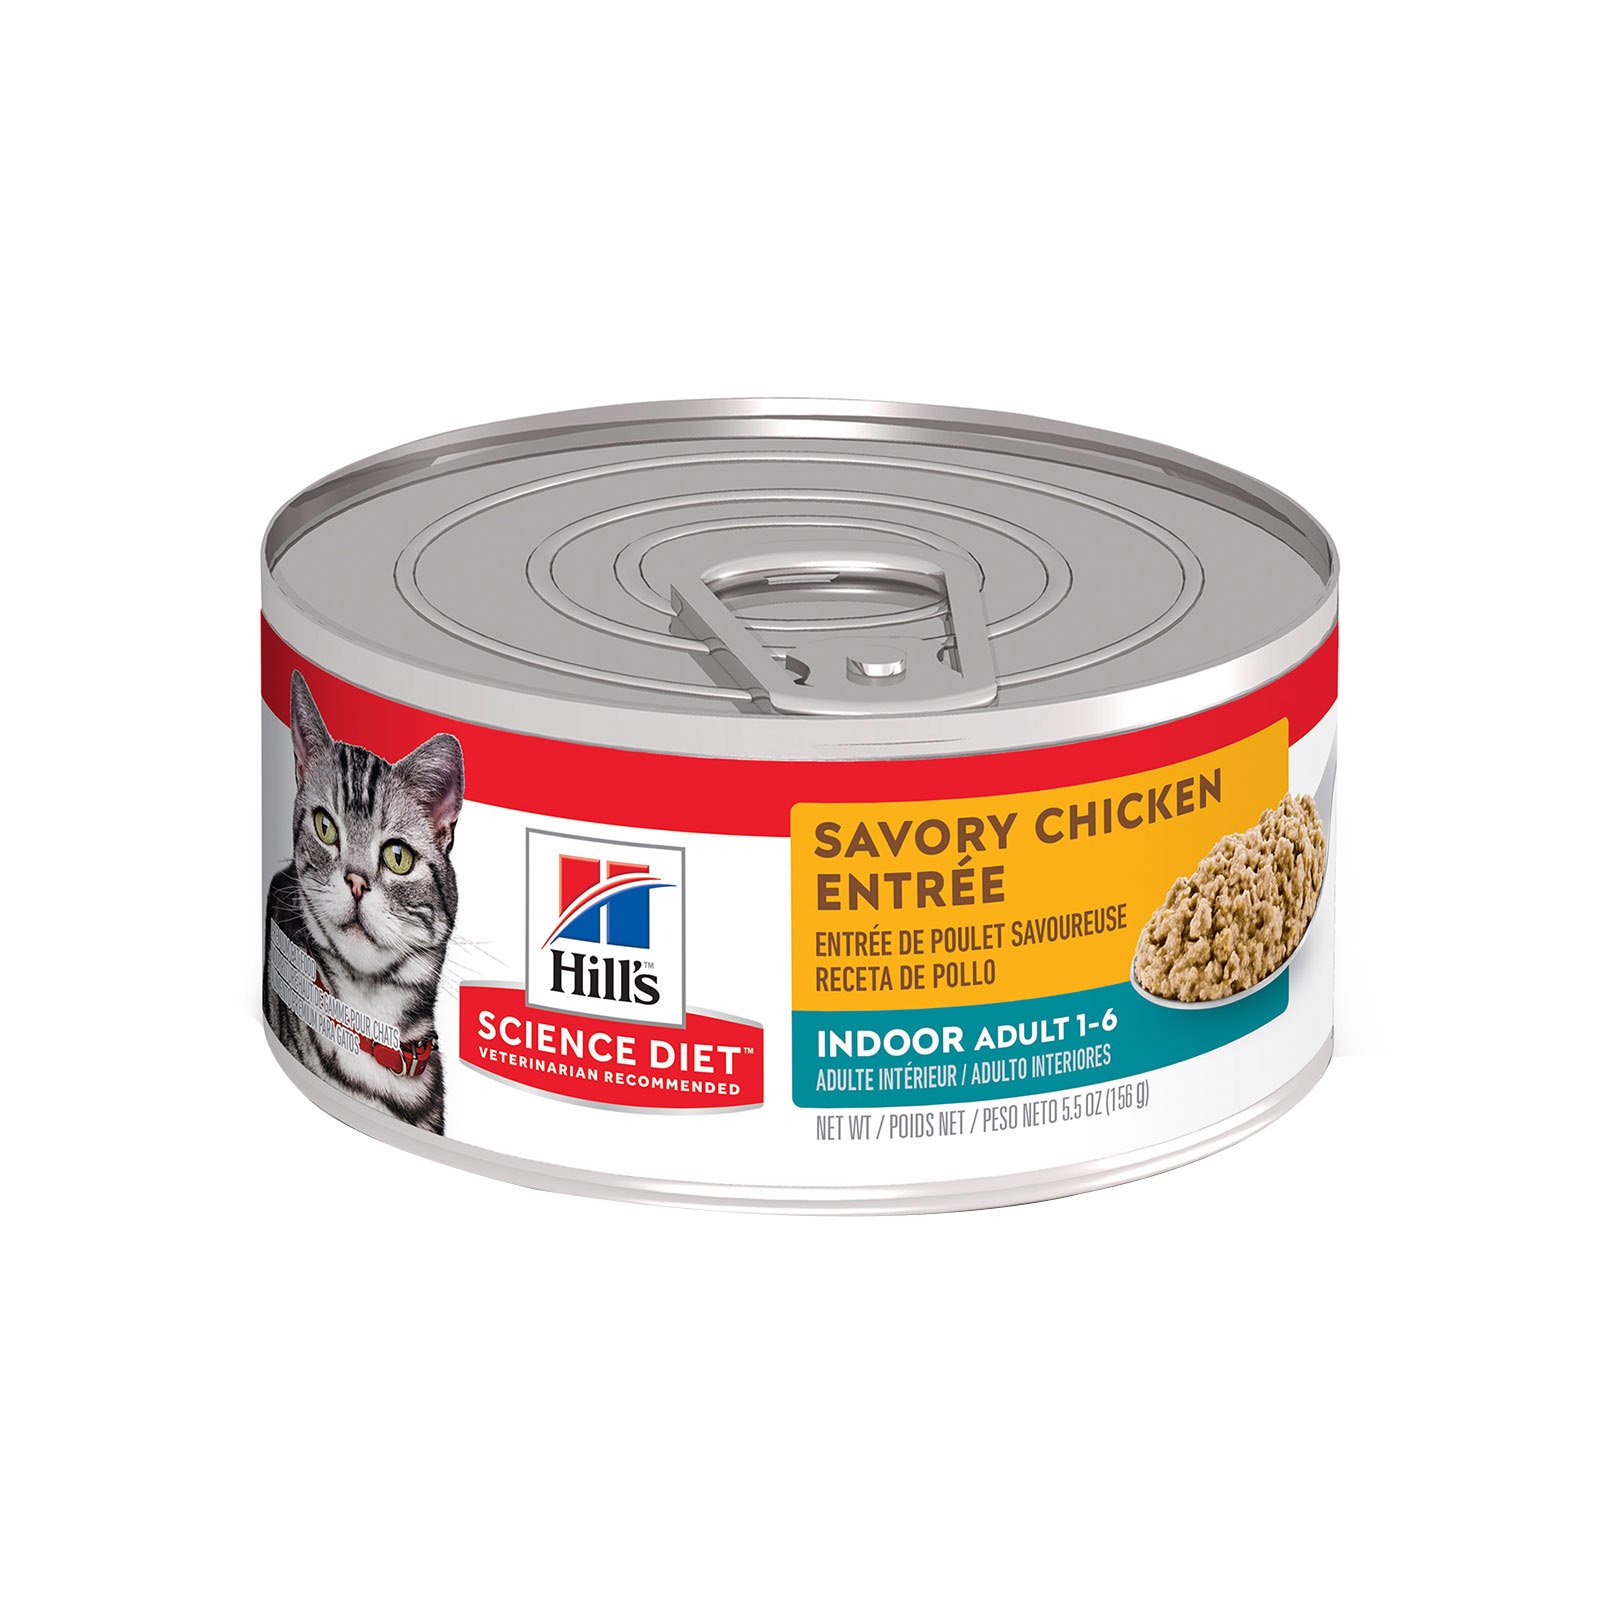 Hill's Science Diet Adult Indoor Savory Chicken Entrée Canned Wet Cat Food